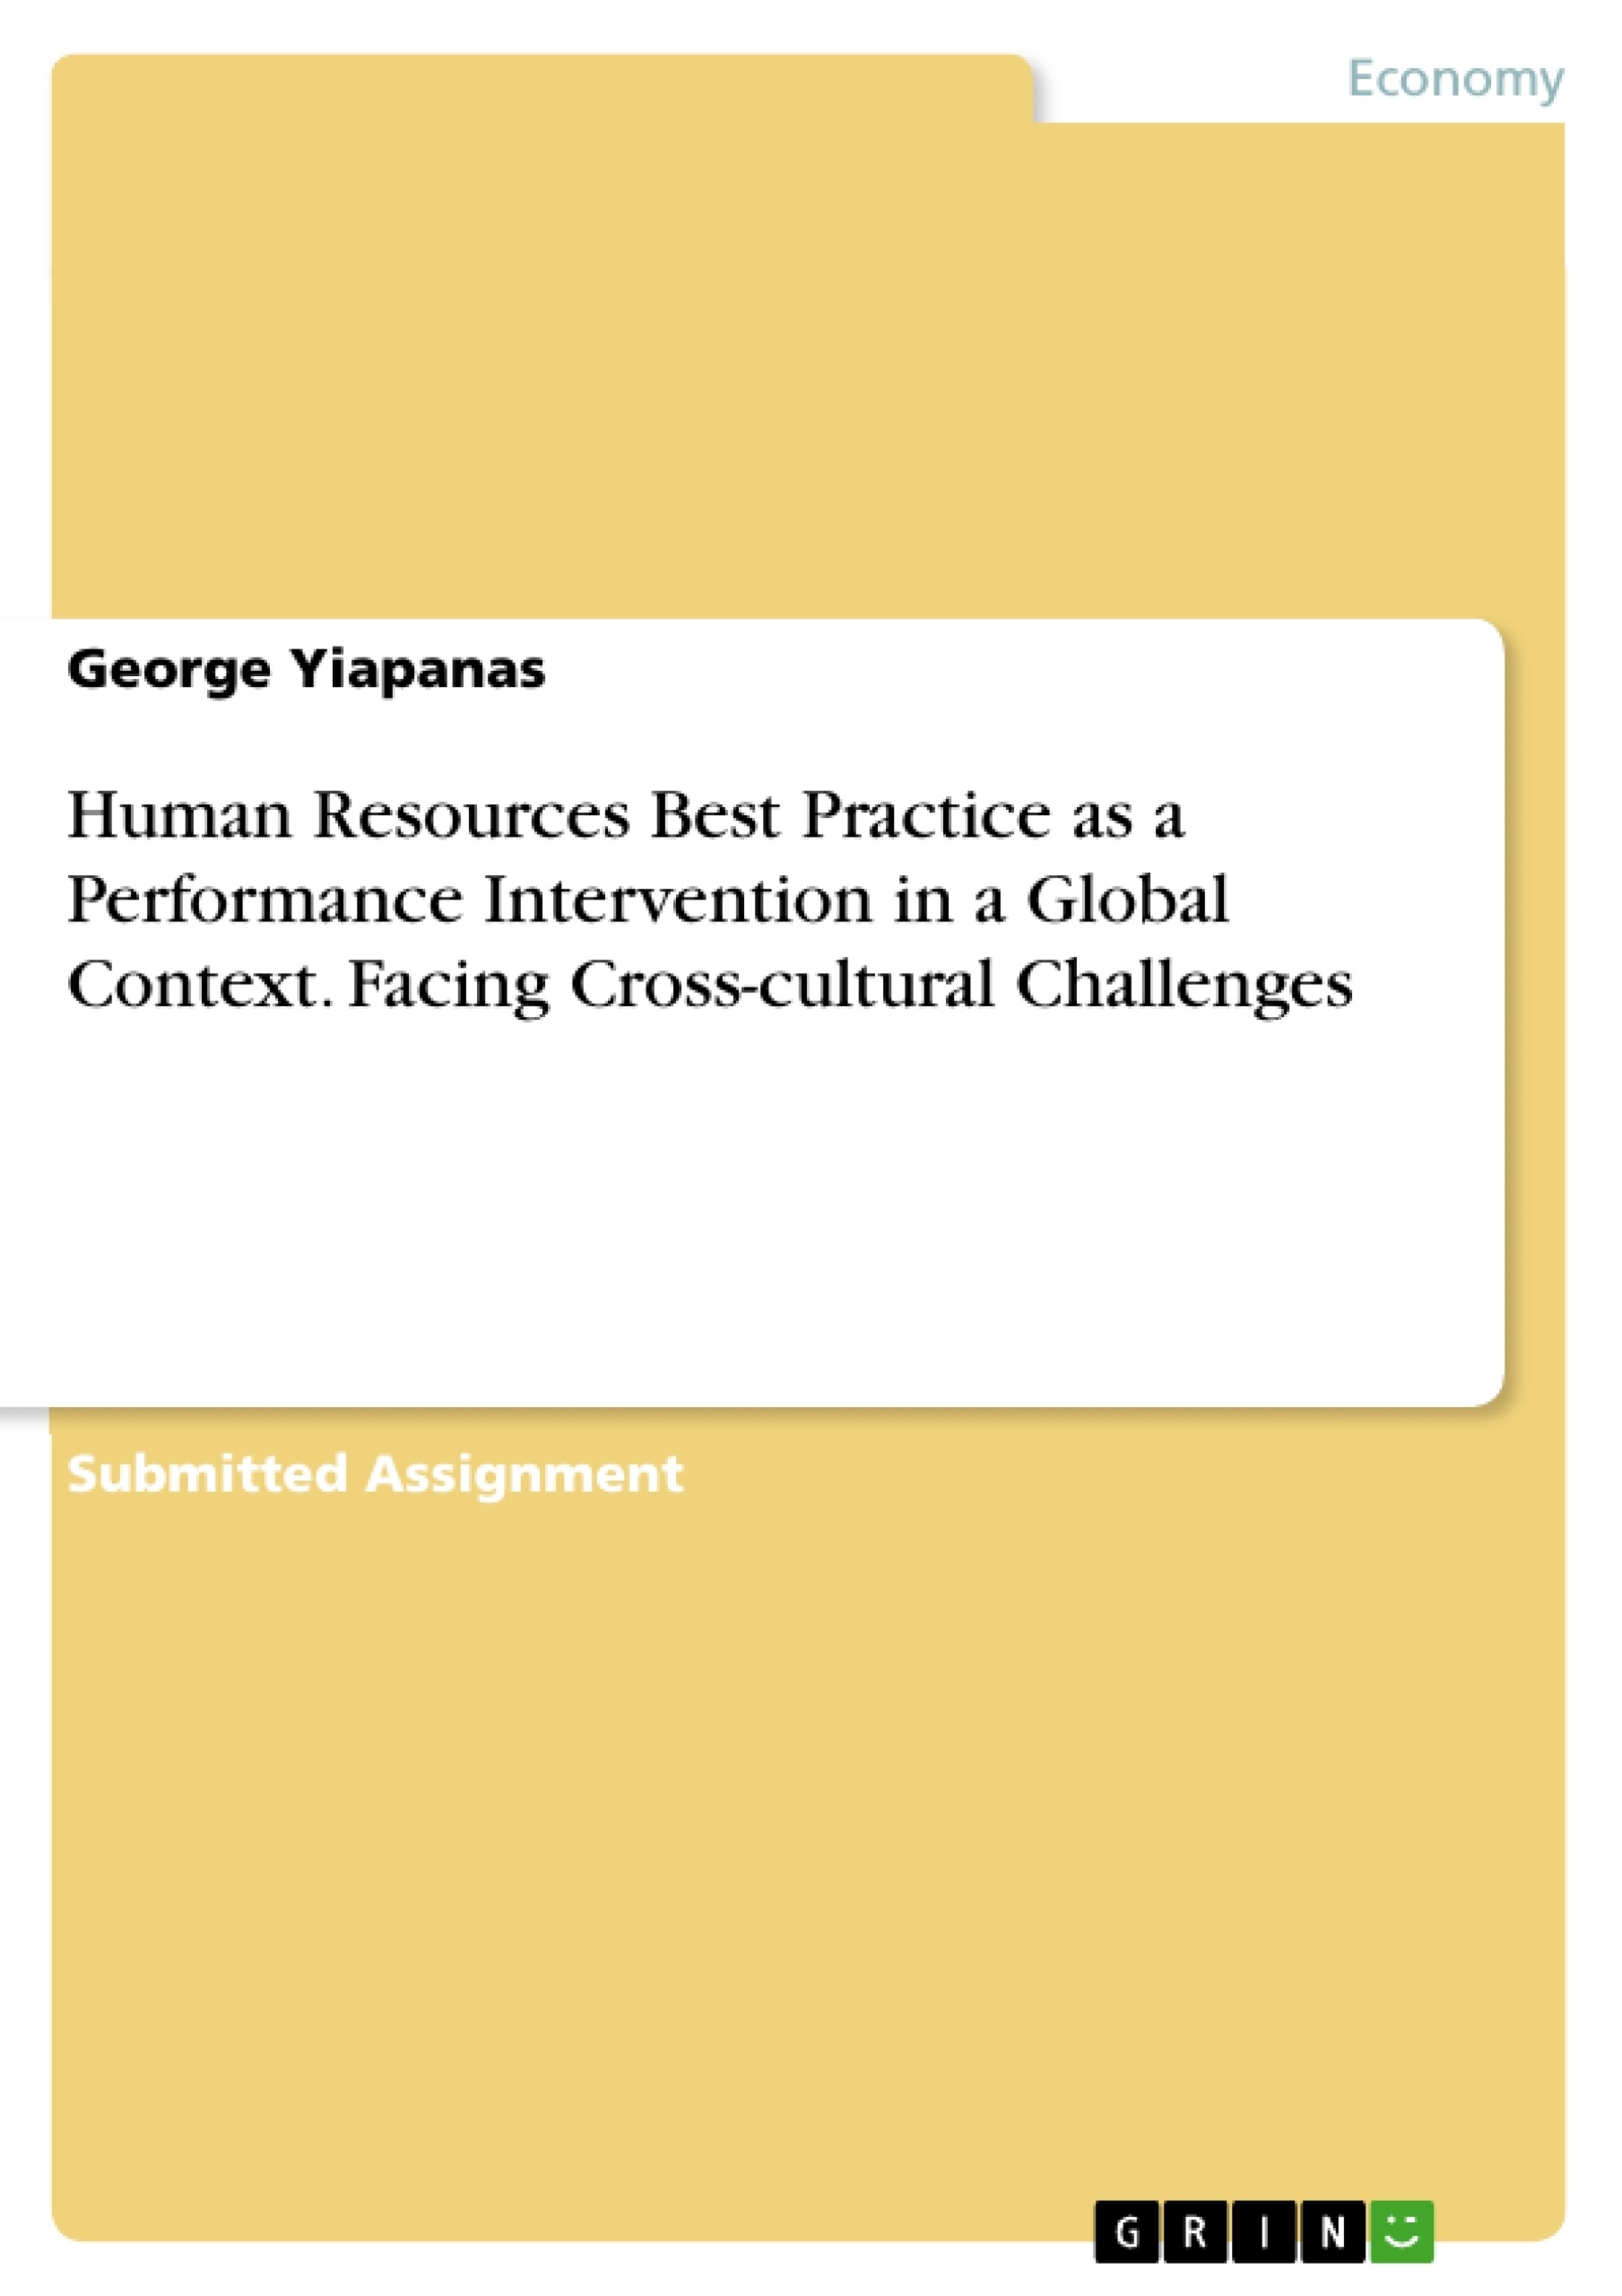 Title: Human Resources Best Practice as a Performance Intervention in a Global Context. Facing Cross-cultural Challenges